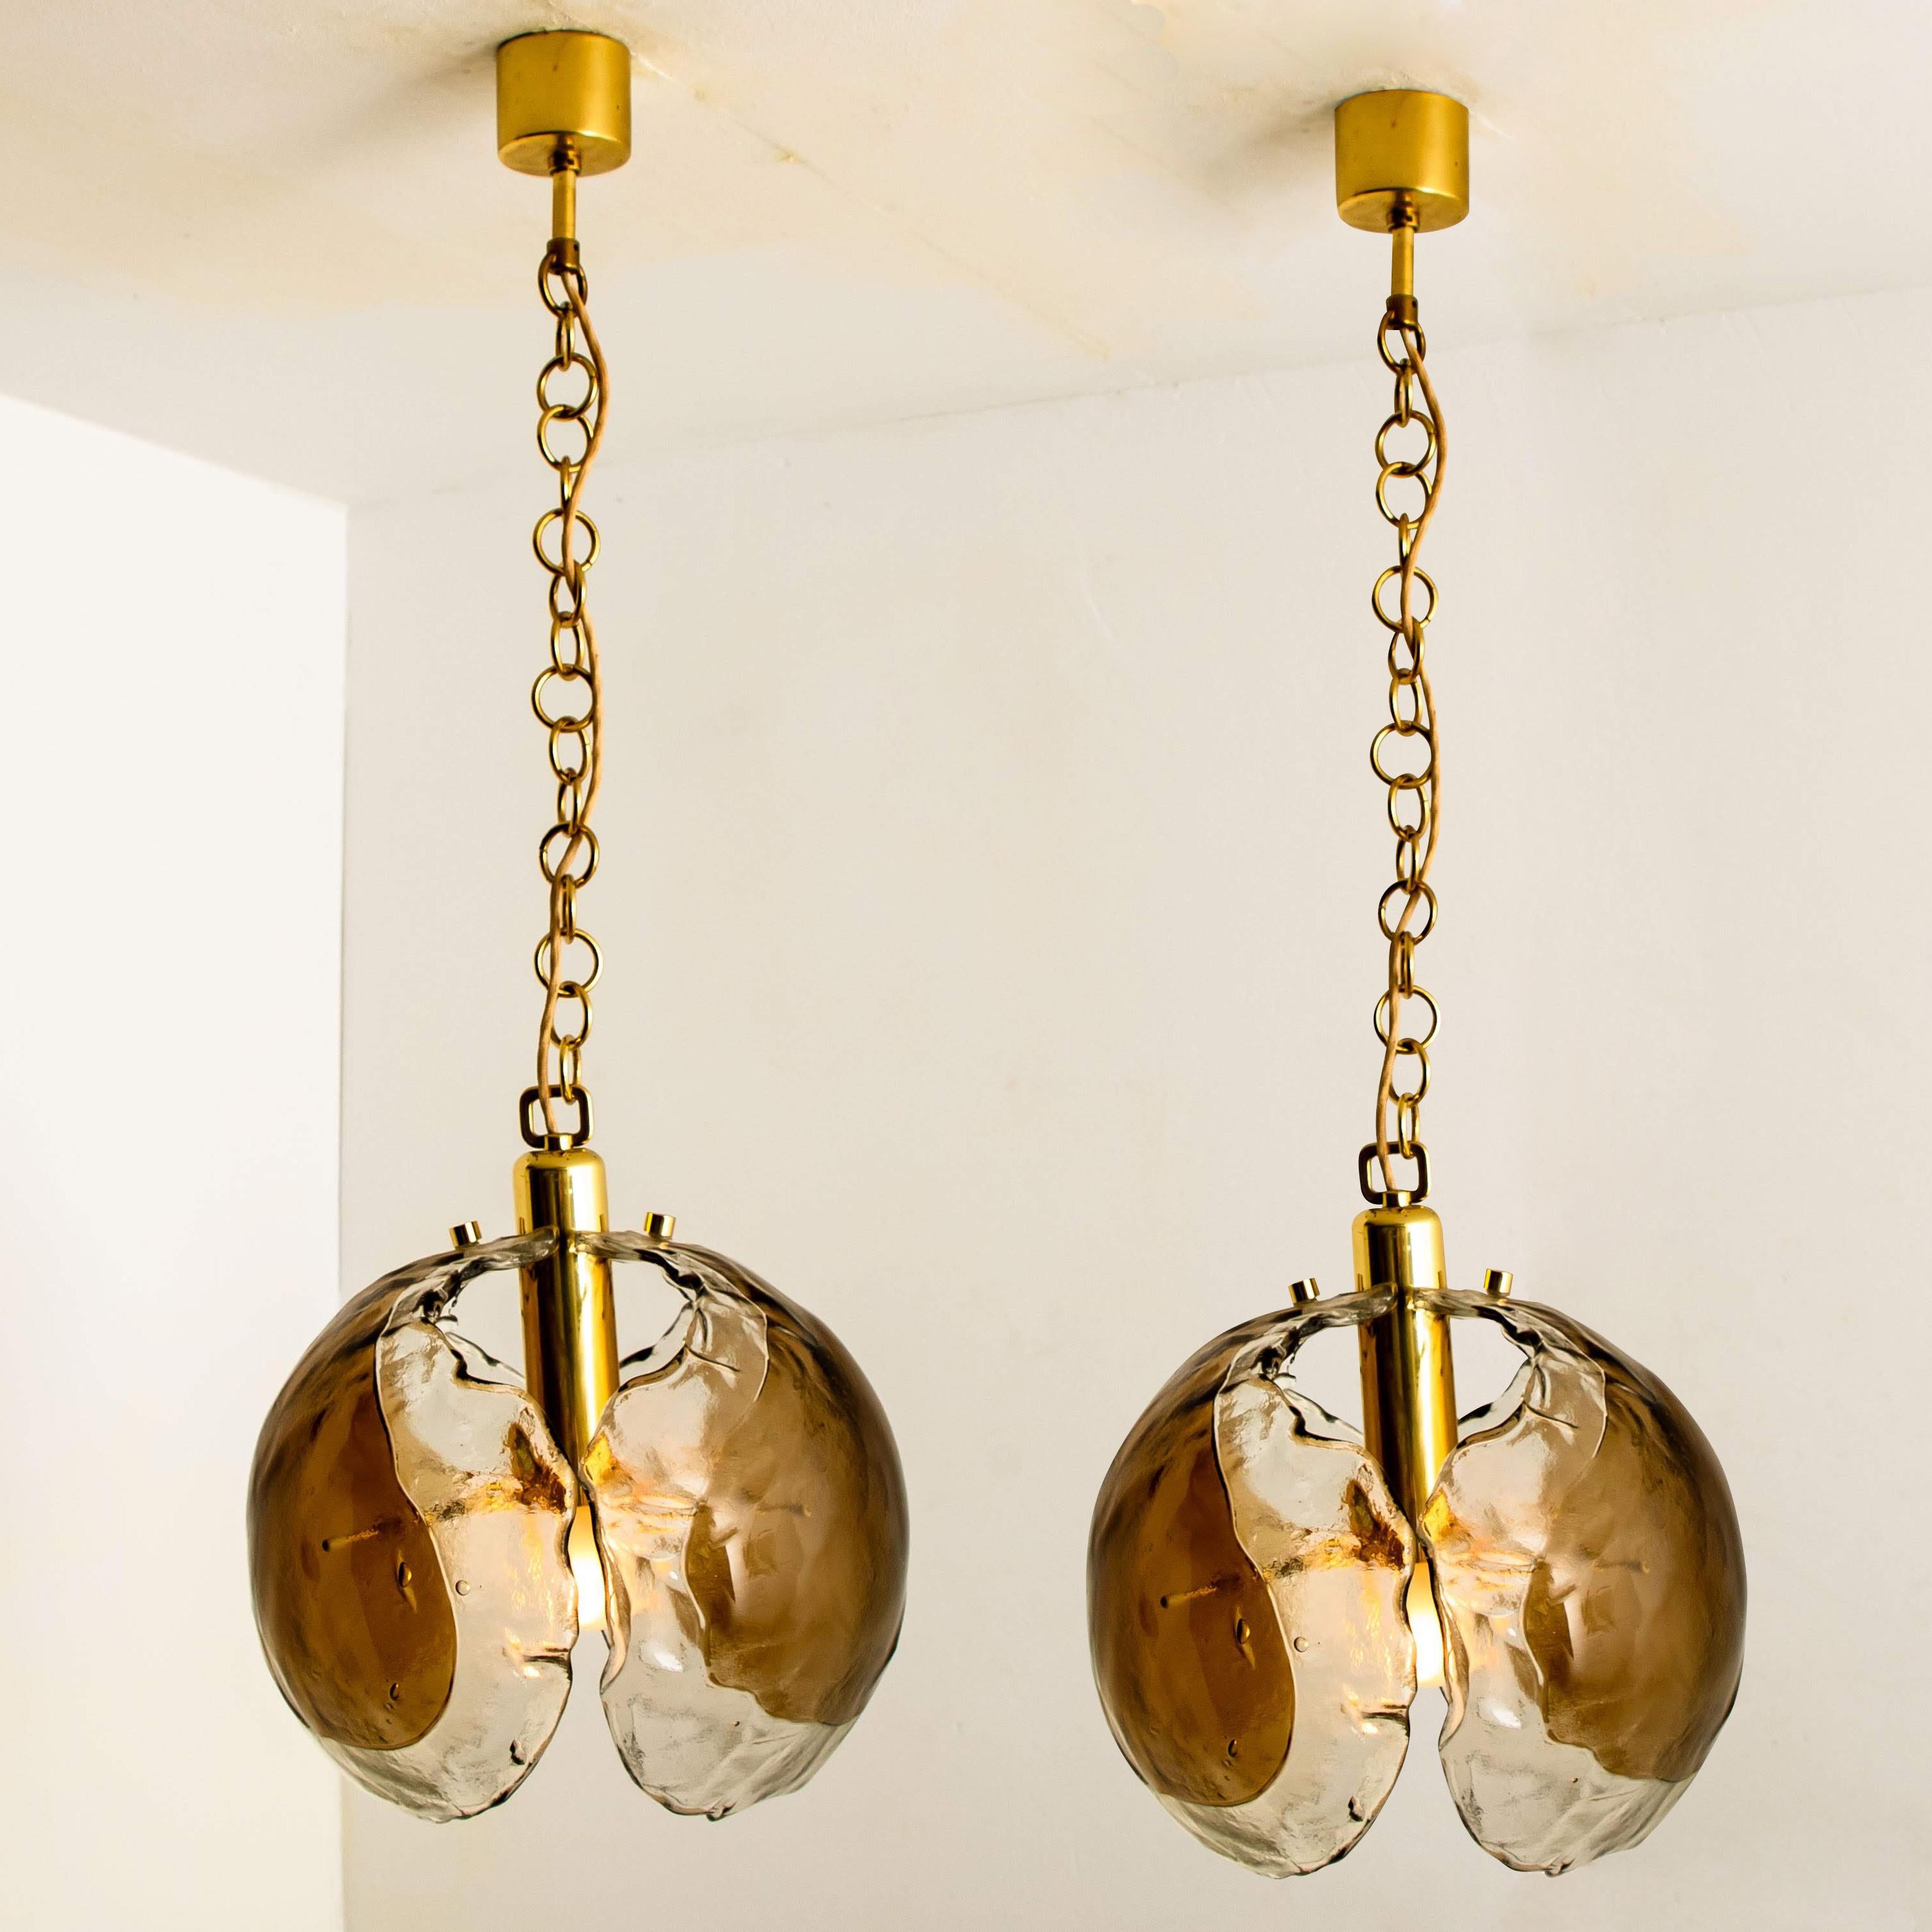 Mid-Century Modern 1 of the 3 Kalmar Chandelier Pendant Lights, Smoked Glass and Brass, 1970s